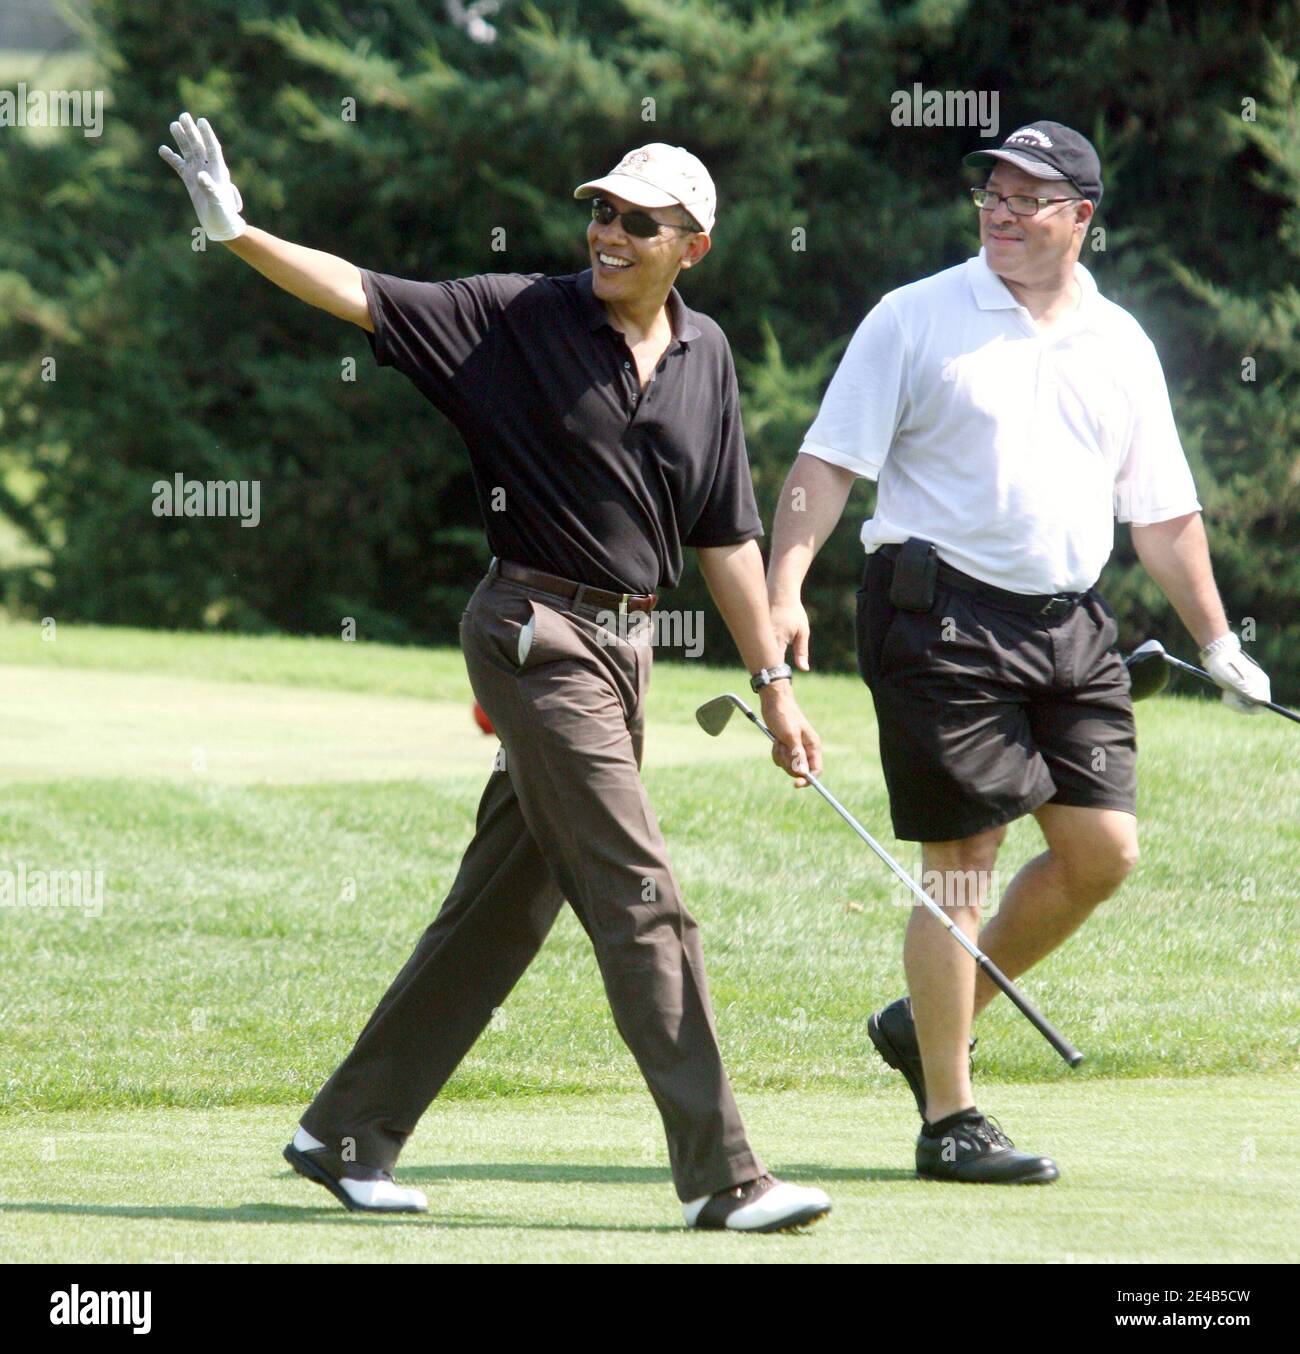 US President Barack Obama, with Dr. Eric Whitaker, a long-time friend of Chicago, waves to spectators on Farm Neck Golf Course in Oak Bluffs, Massachussetts, USA on August 24, 2009, during a round of golf. The President's tee shot landed in the woods. The other players in the foursome were Marvin Nicholson, White House trip director, and Robert Wolf, CEO of UBS. Pool photo by Vincent DeWitt/ABACAPRESS.COM Stock Photo